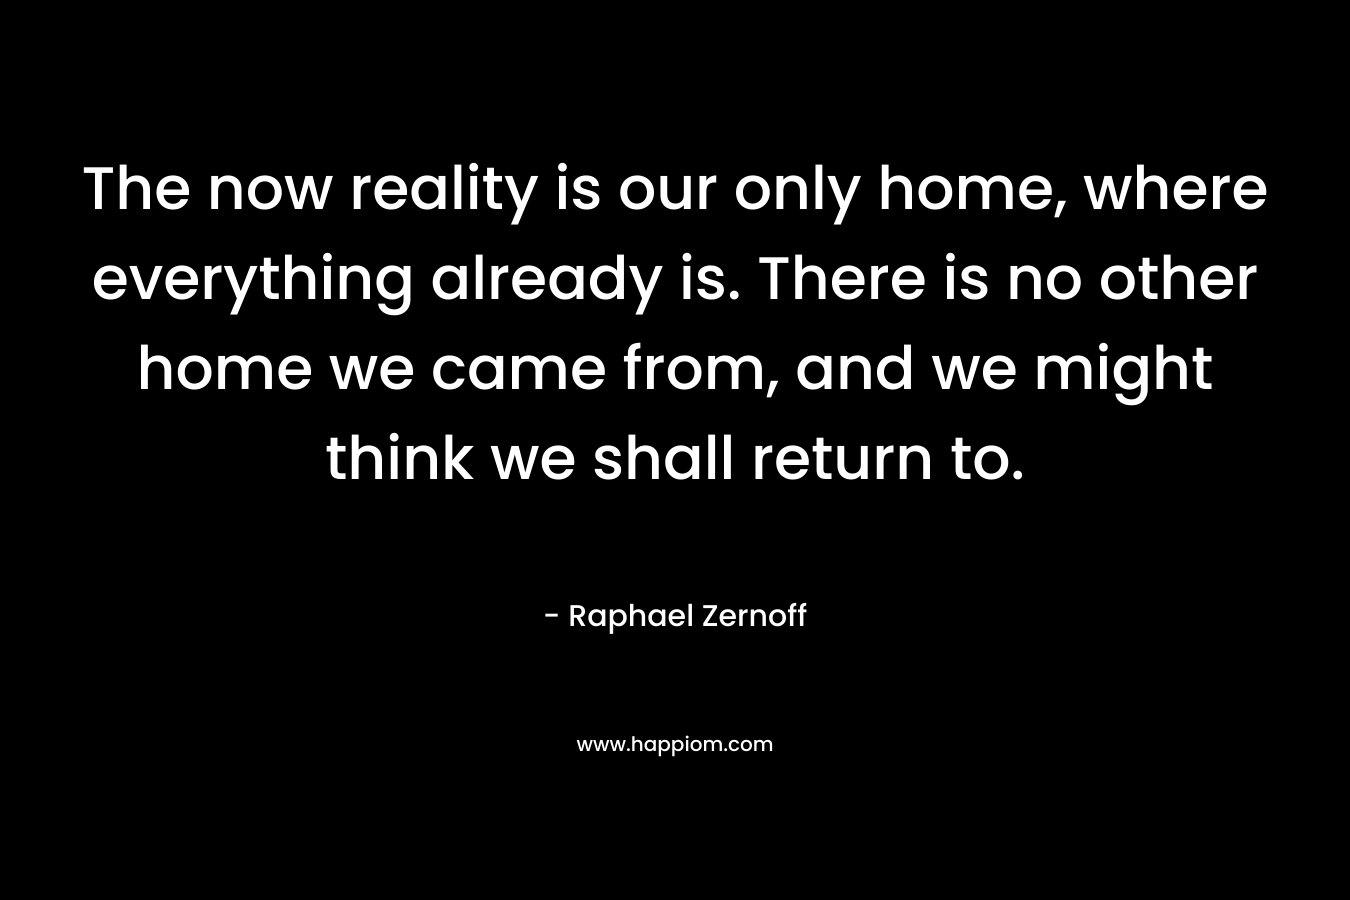 The now reality is our only home, where everything already is. There is no other home we came from, and we might think we shall return to. – Raphael Zernoff